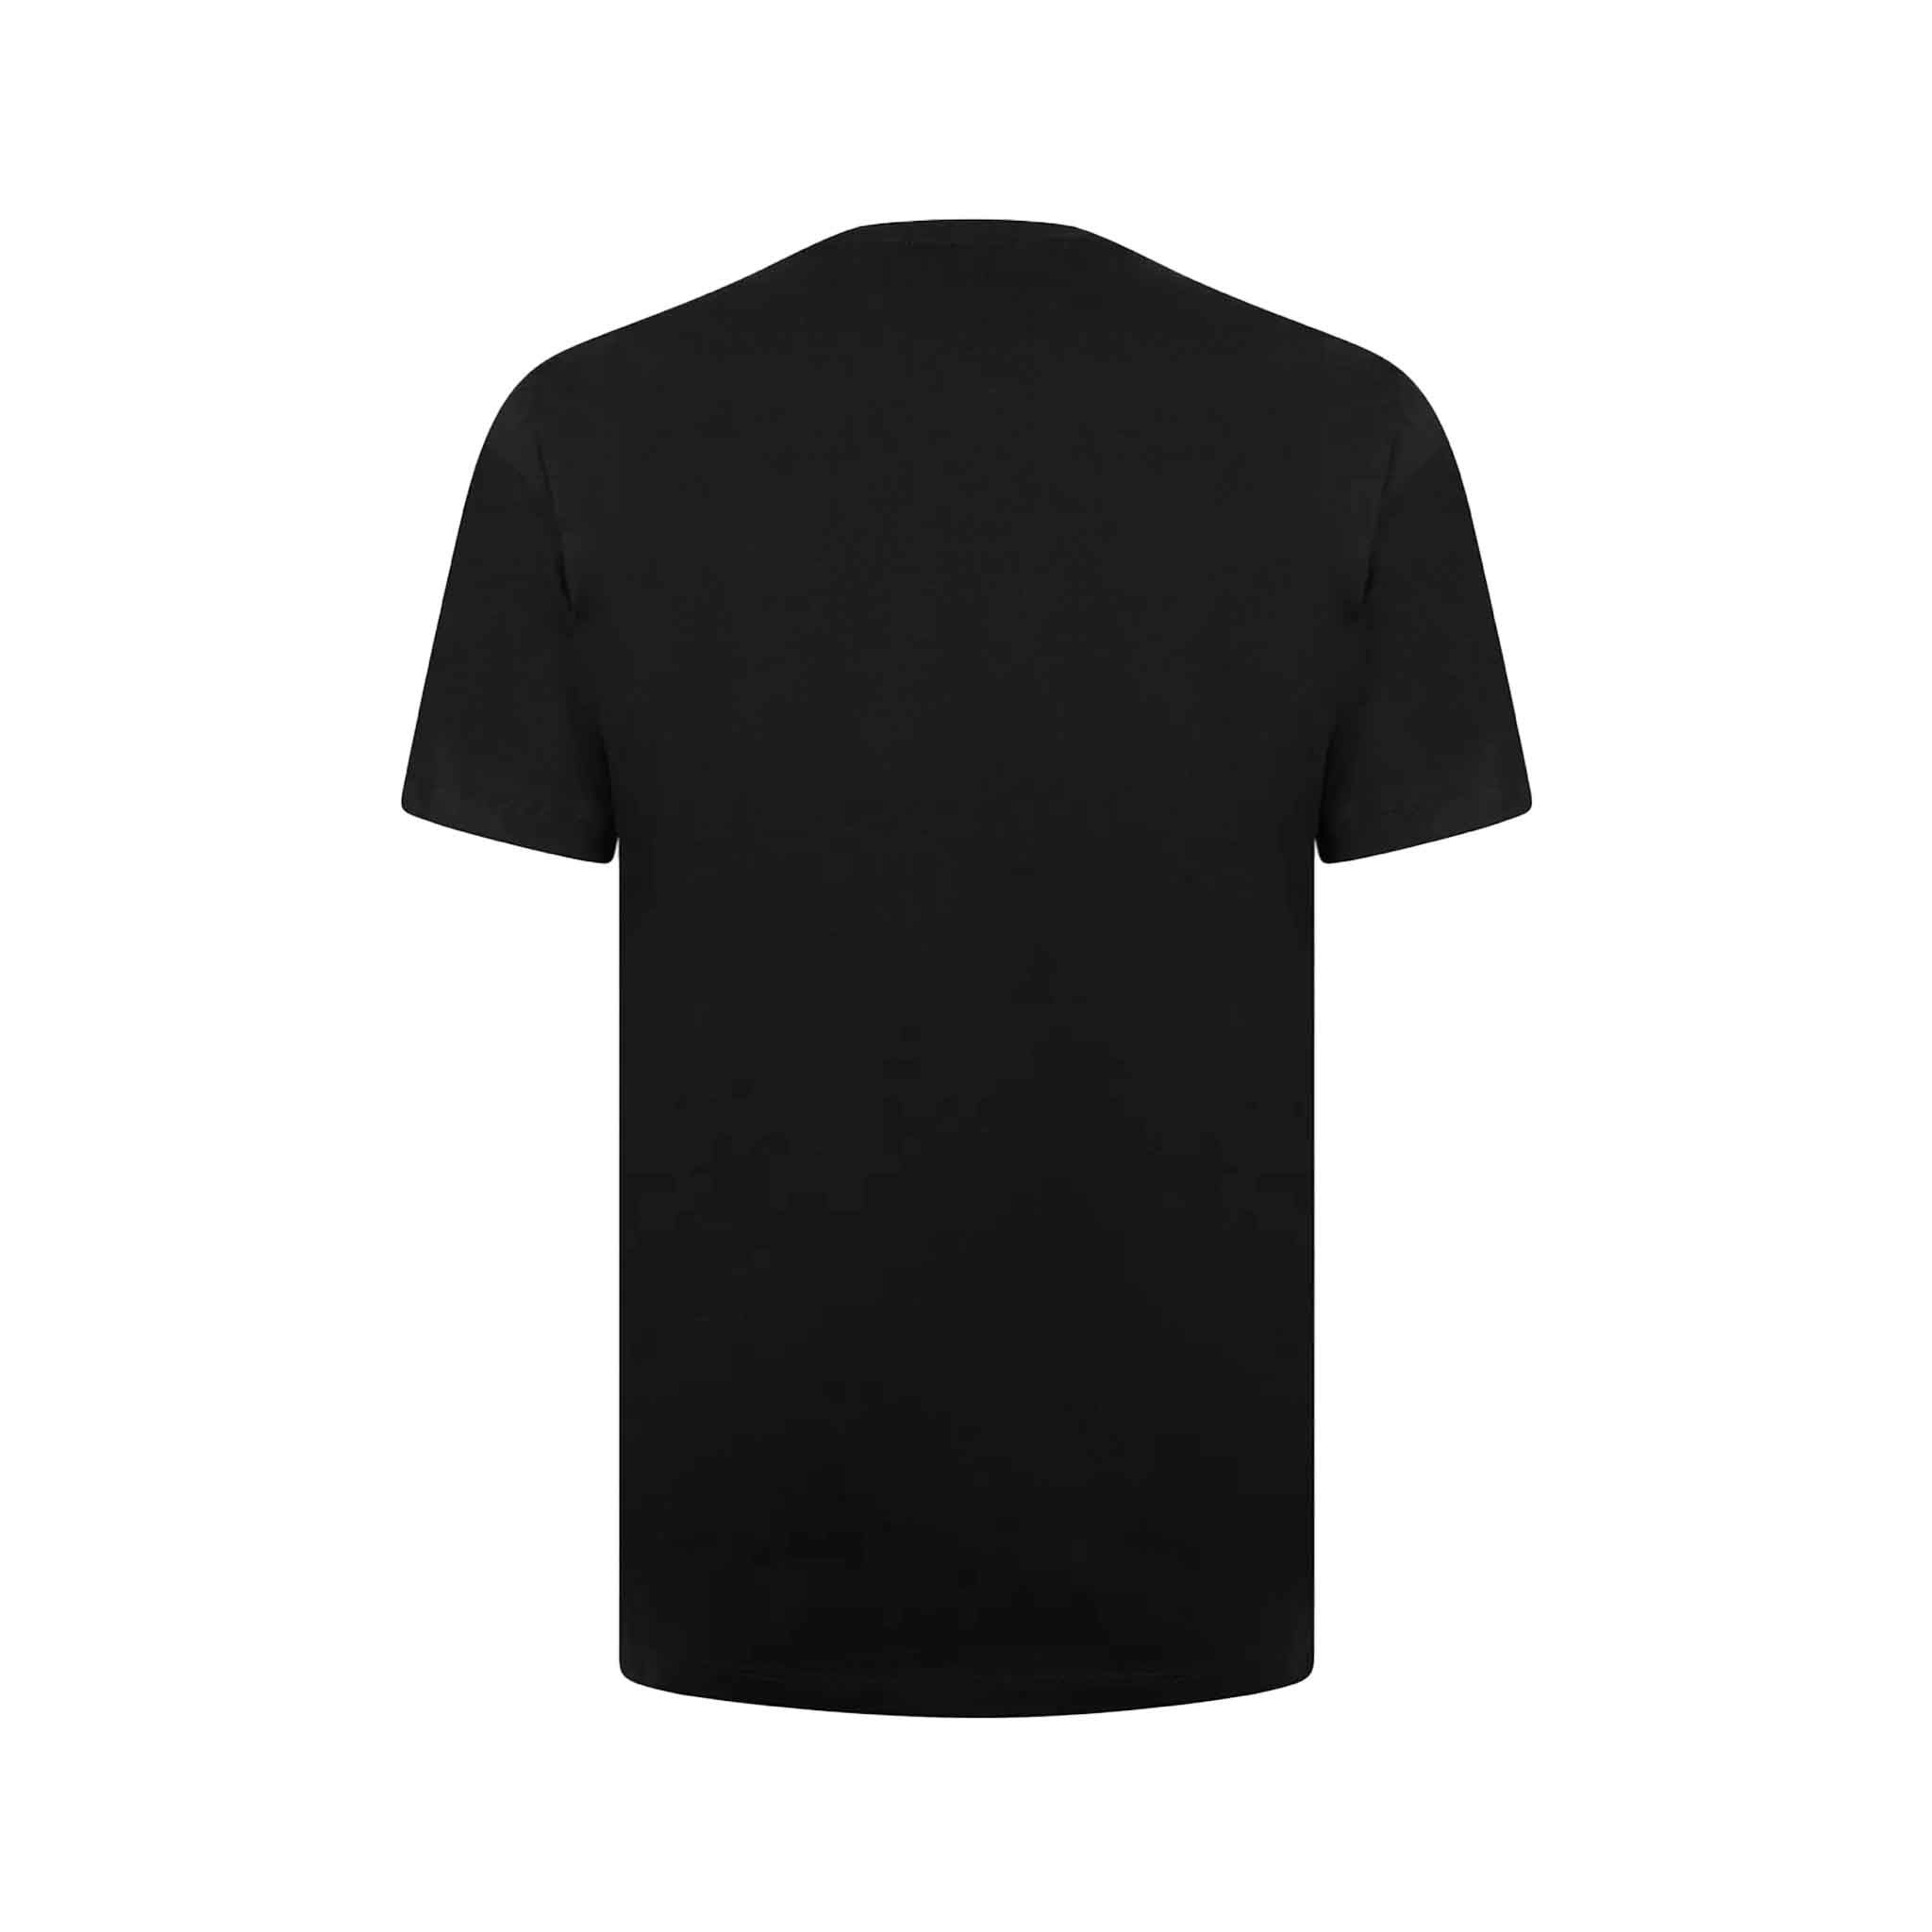 C.P. Company 30/2 Mercerized Jersey Twisted British Sailor T-shirt in Black